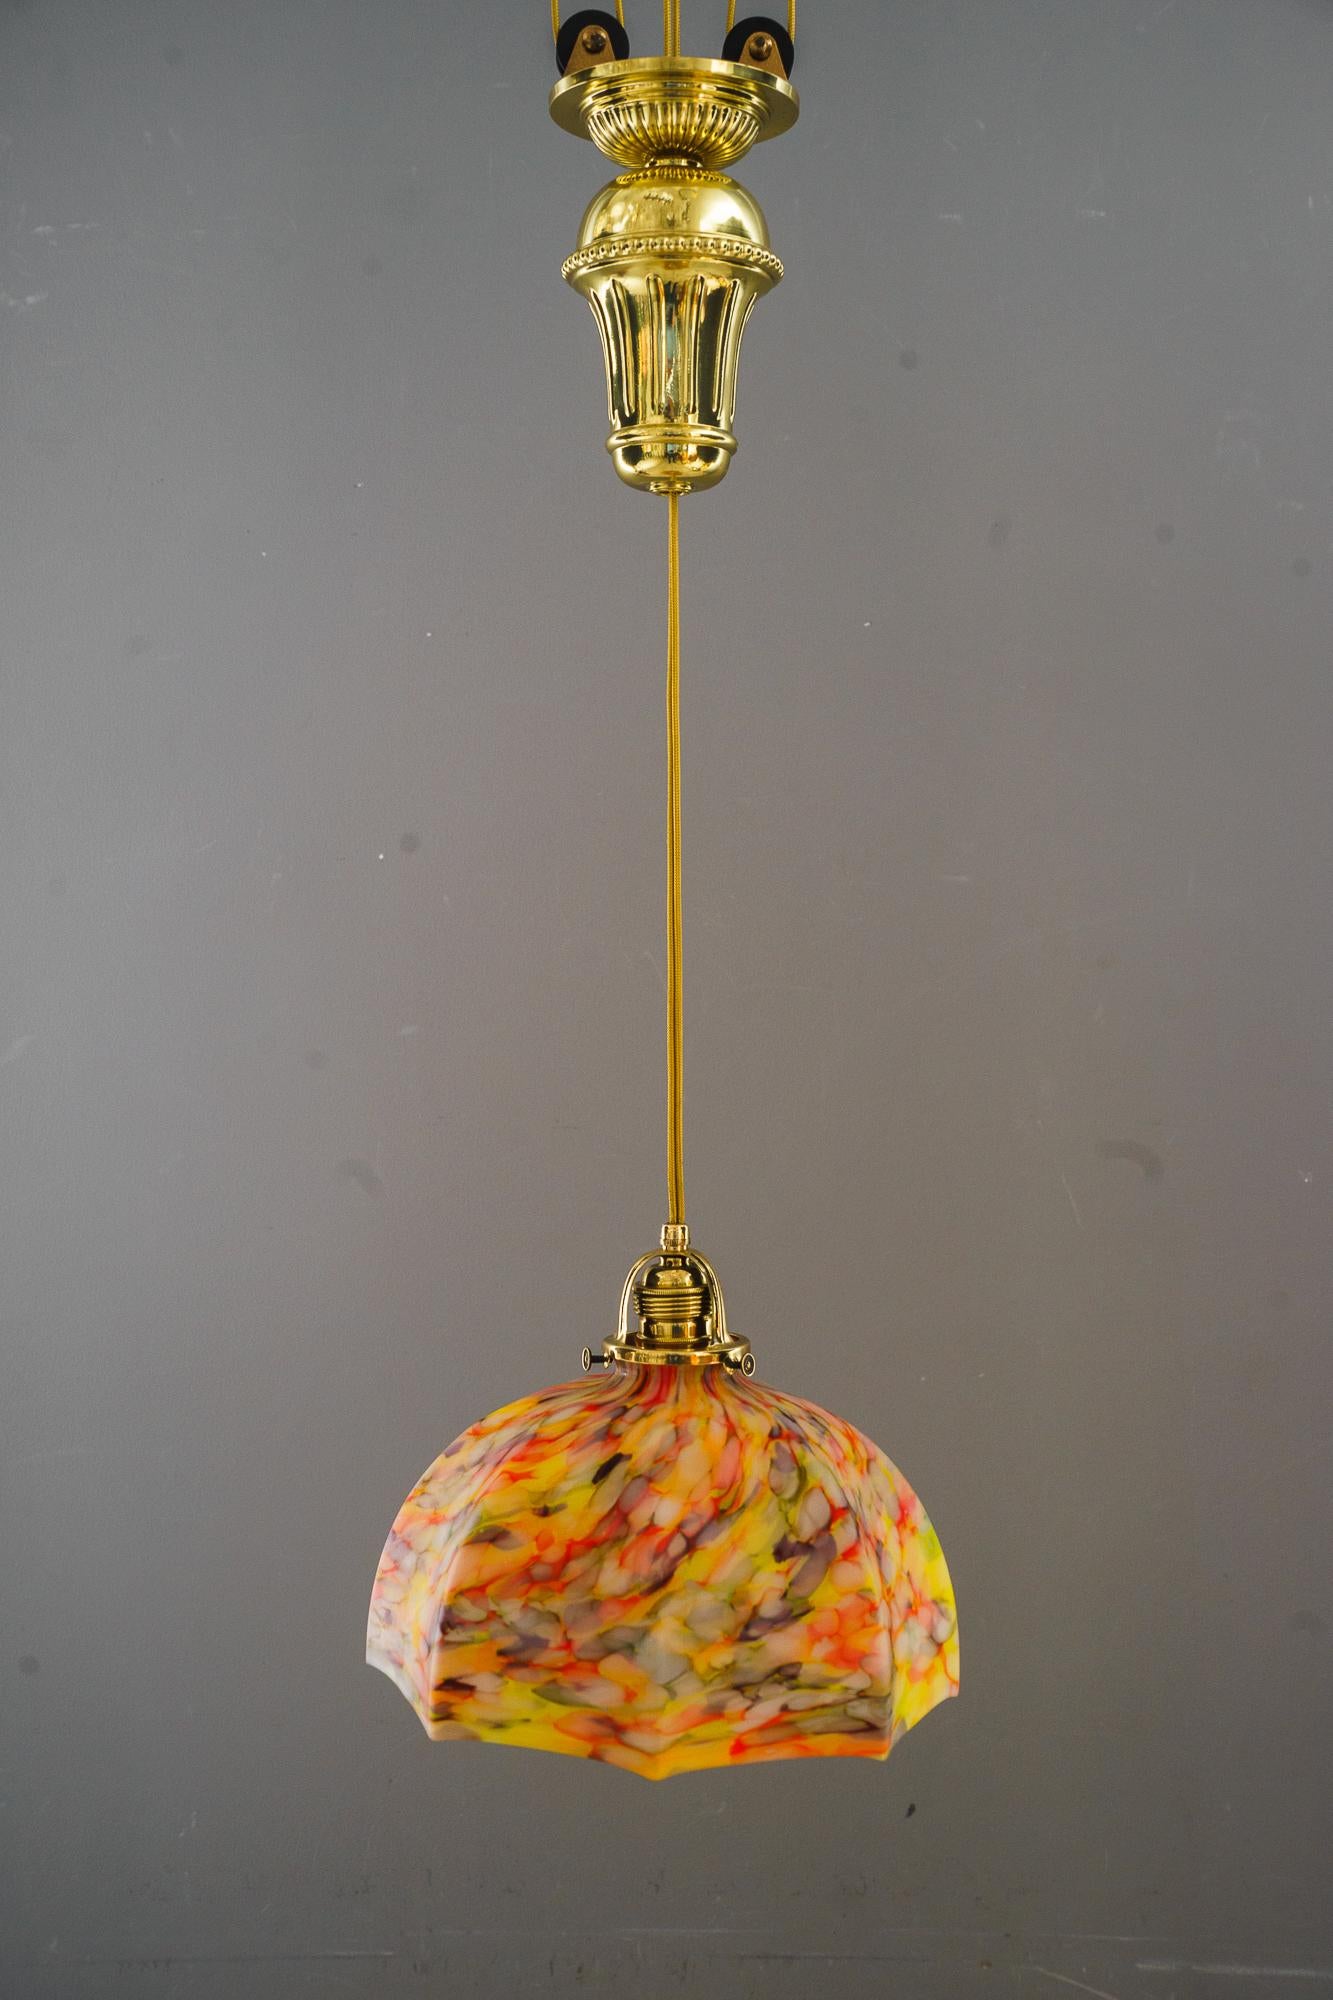 2x Art Deco adjustable pendants vienna around 1920s ( price per piece )
the hight is adjustable from 90cm up to 177cm
Middle position is 110cm
Polished and stove enameled
they are similar not 100% equal